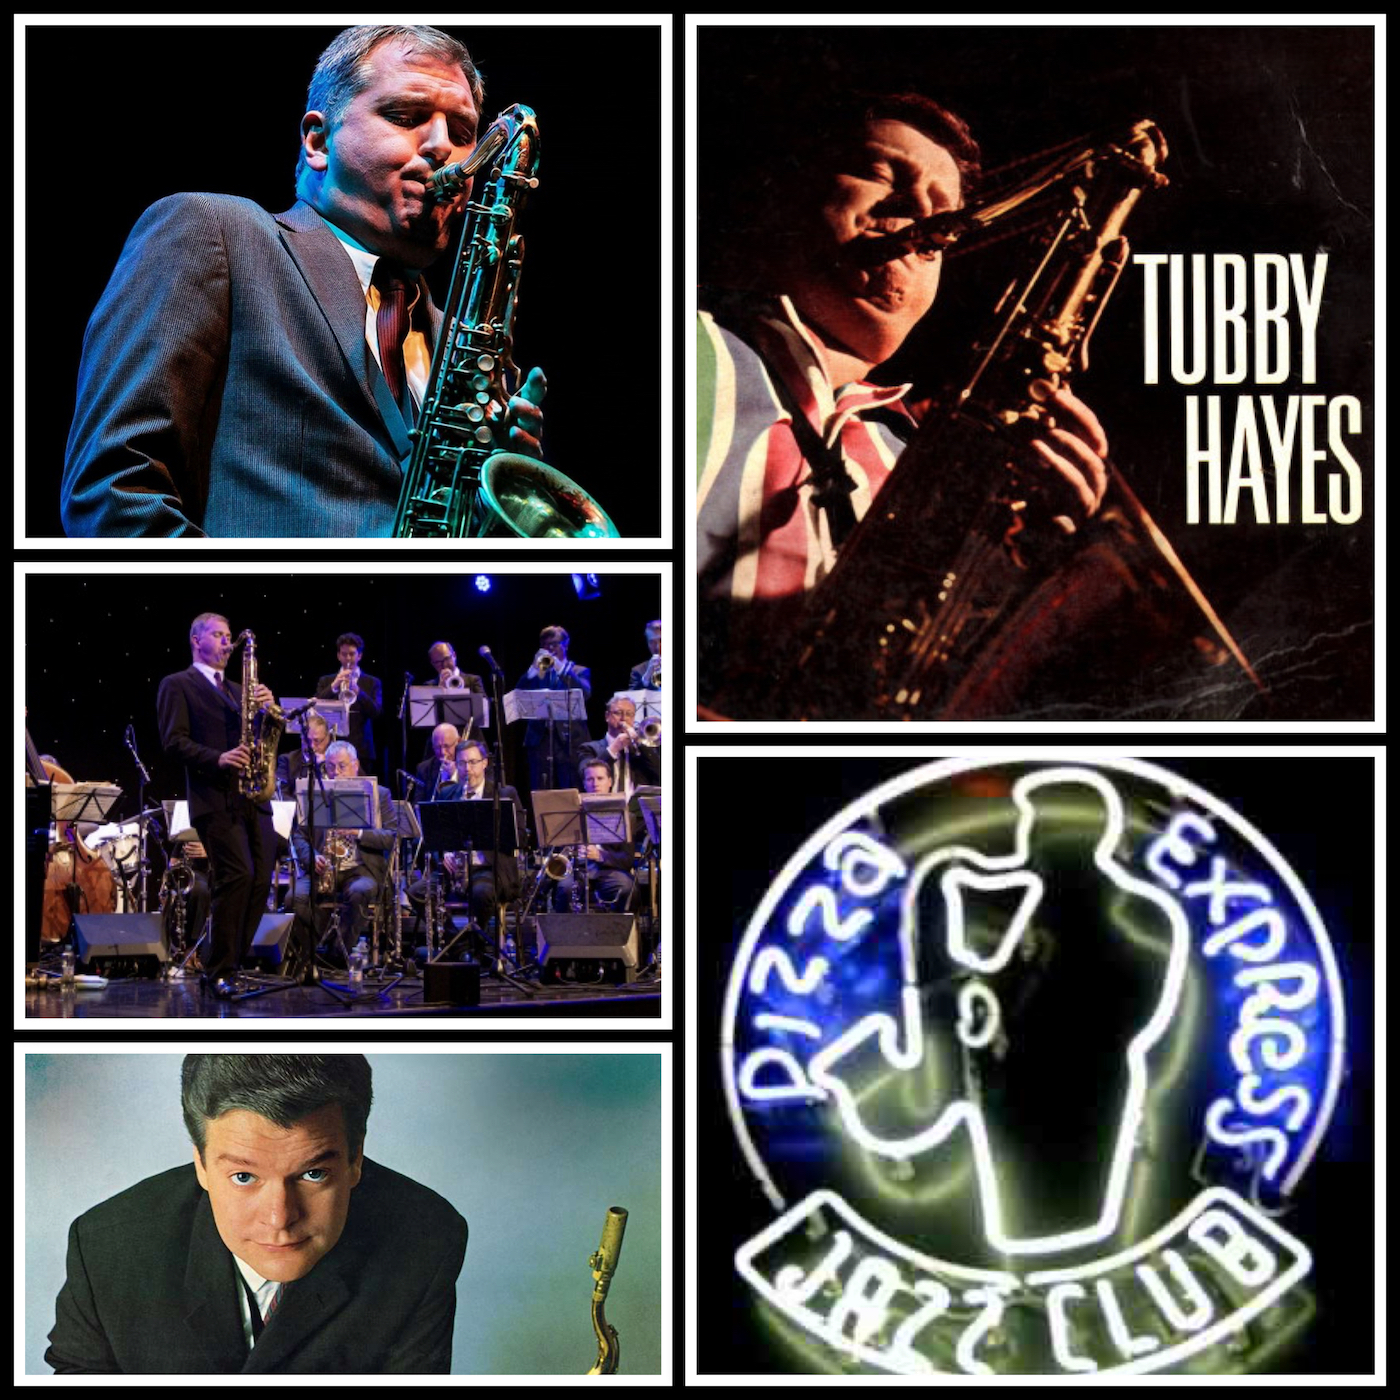 THE SIMON SPILLETT BIG BAND PLAYS  THE MUSIC OF TUBBY HAYES